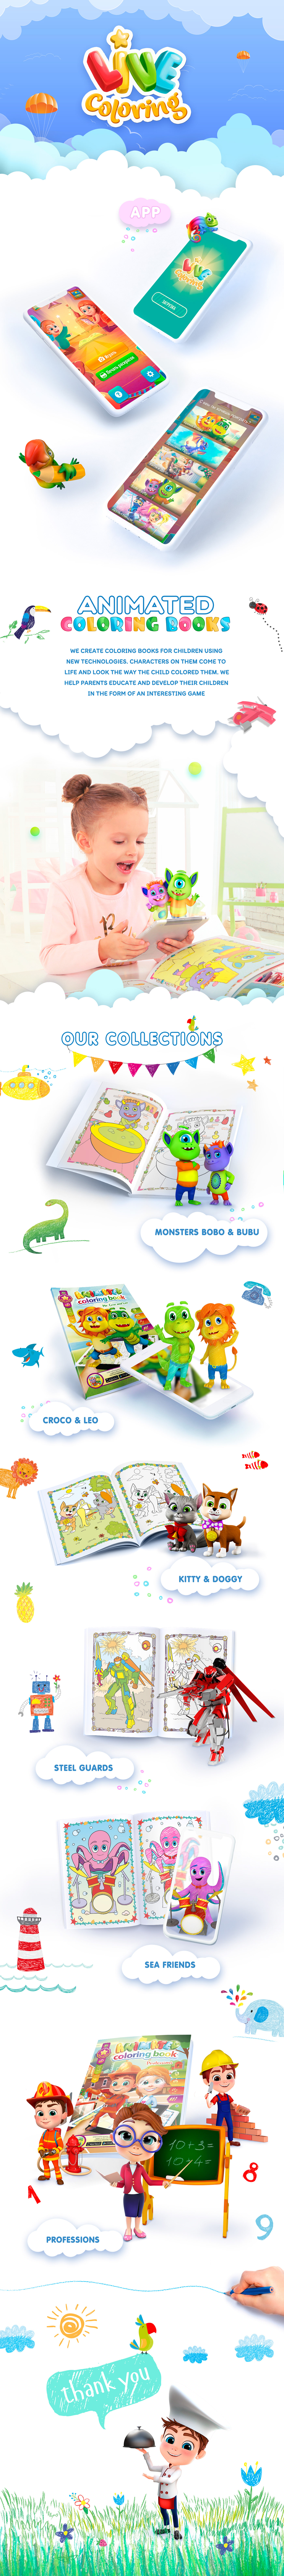 AR Coloring Books 3D characters Live animations live coloring augmented reality ILLUSTRATION  wow